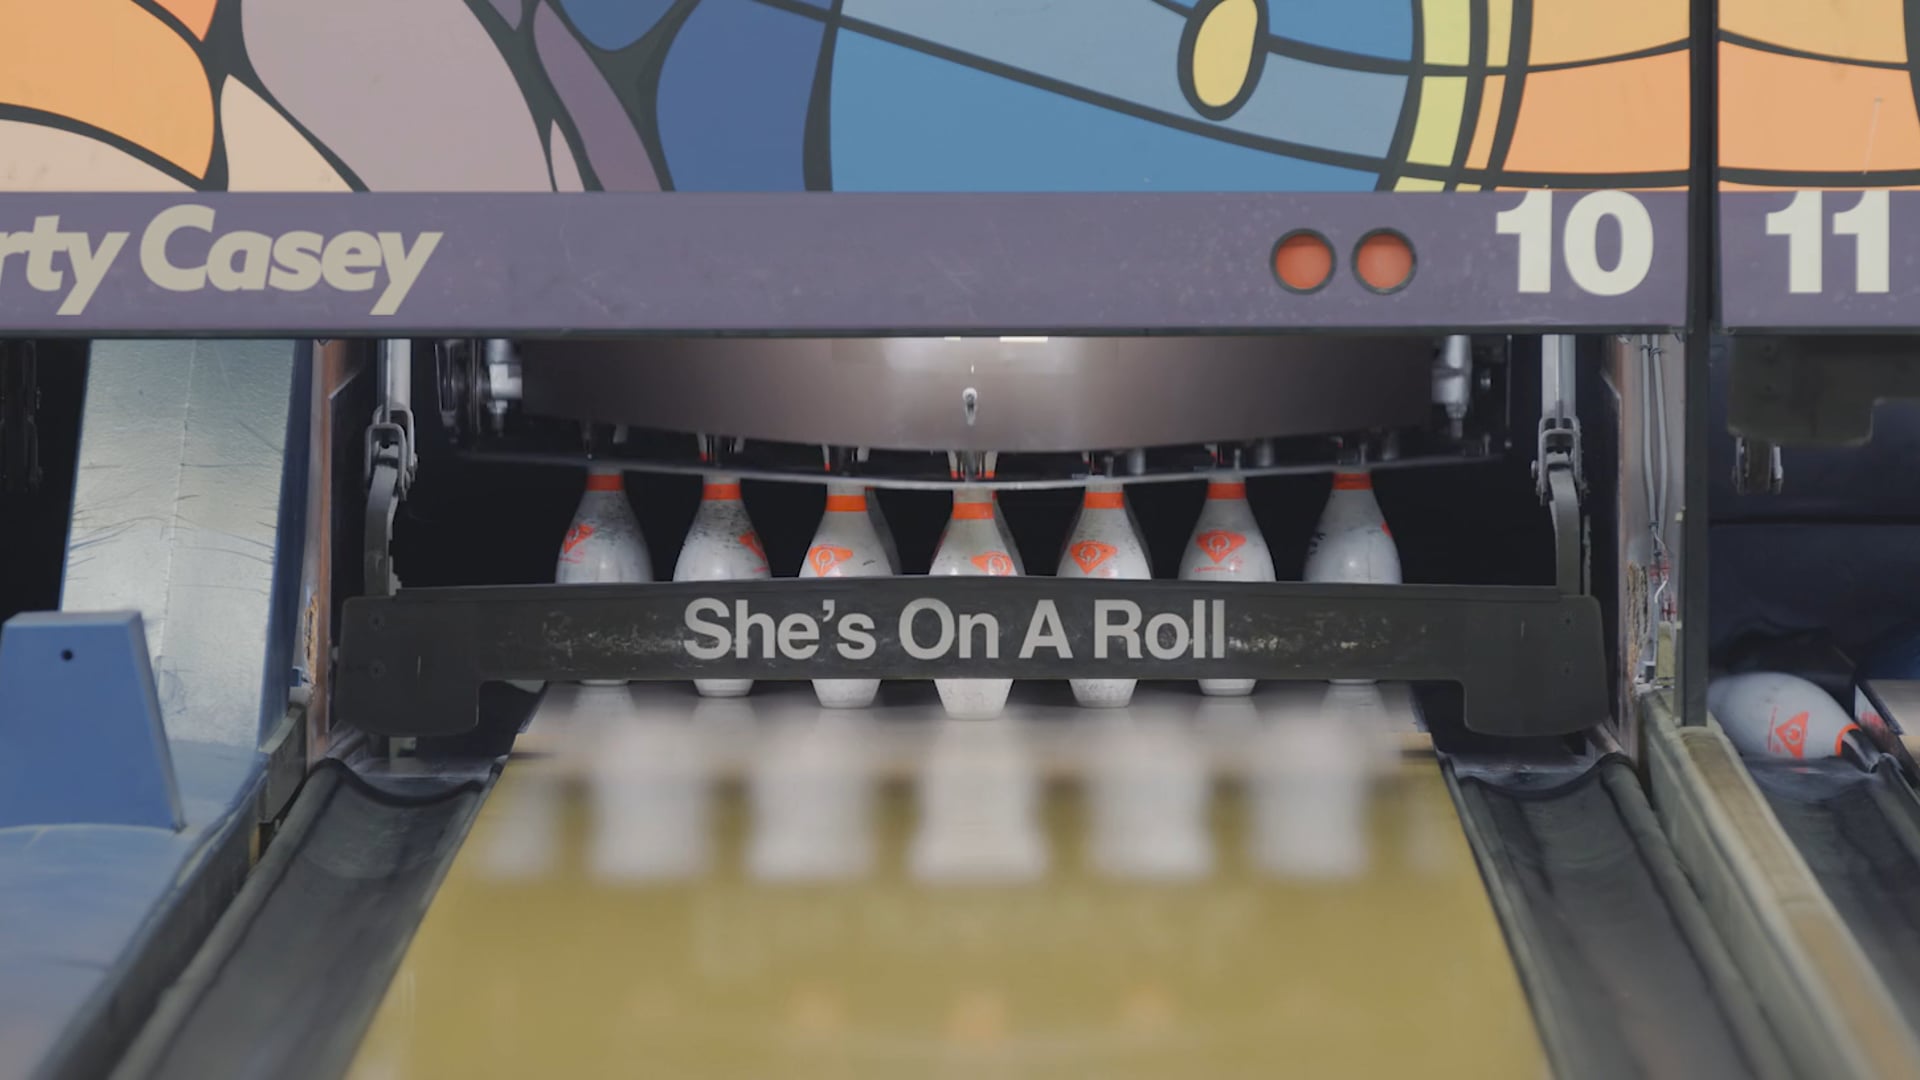 Marty Casey - She's On A Roll (Music Video)